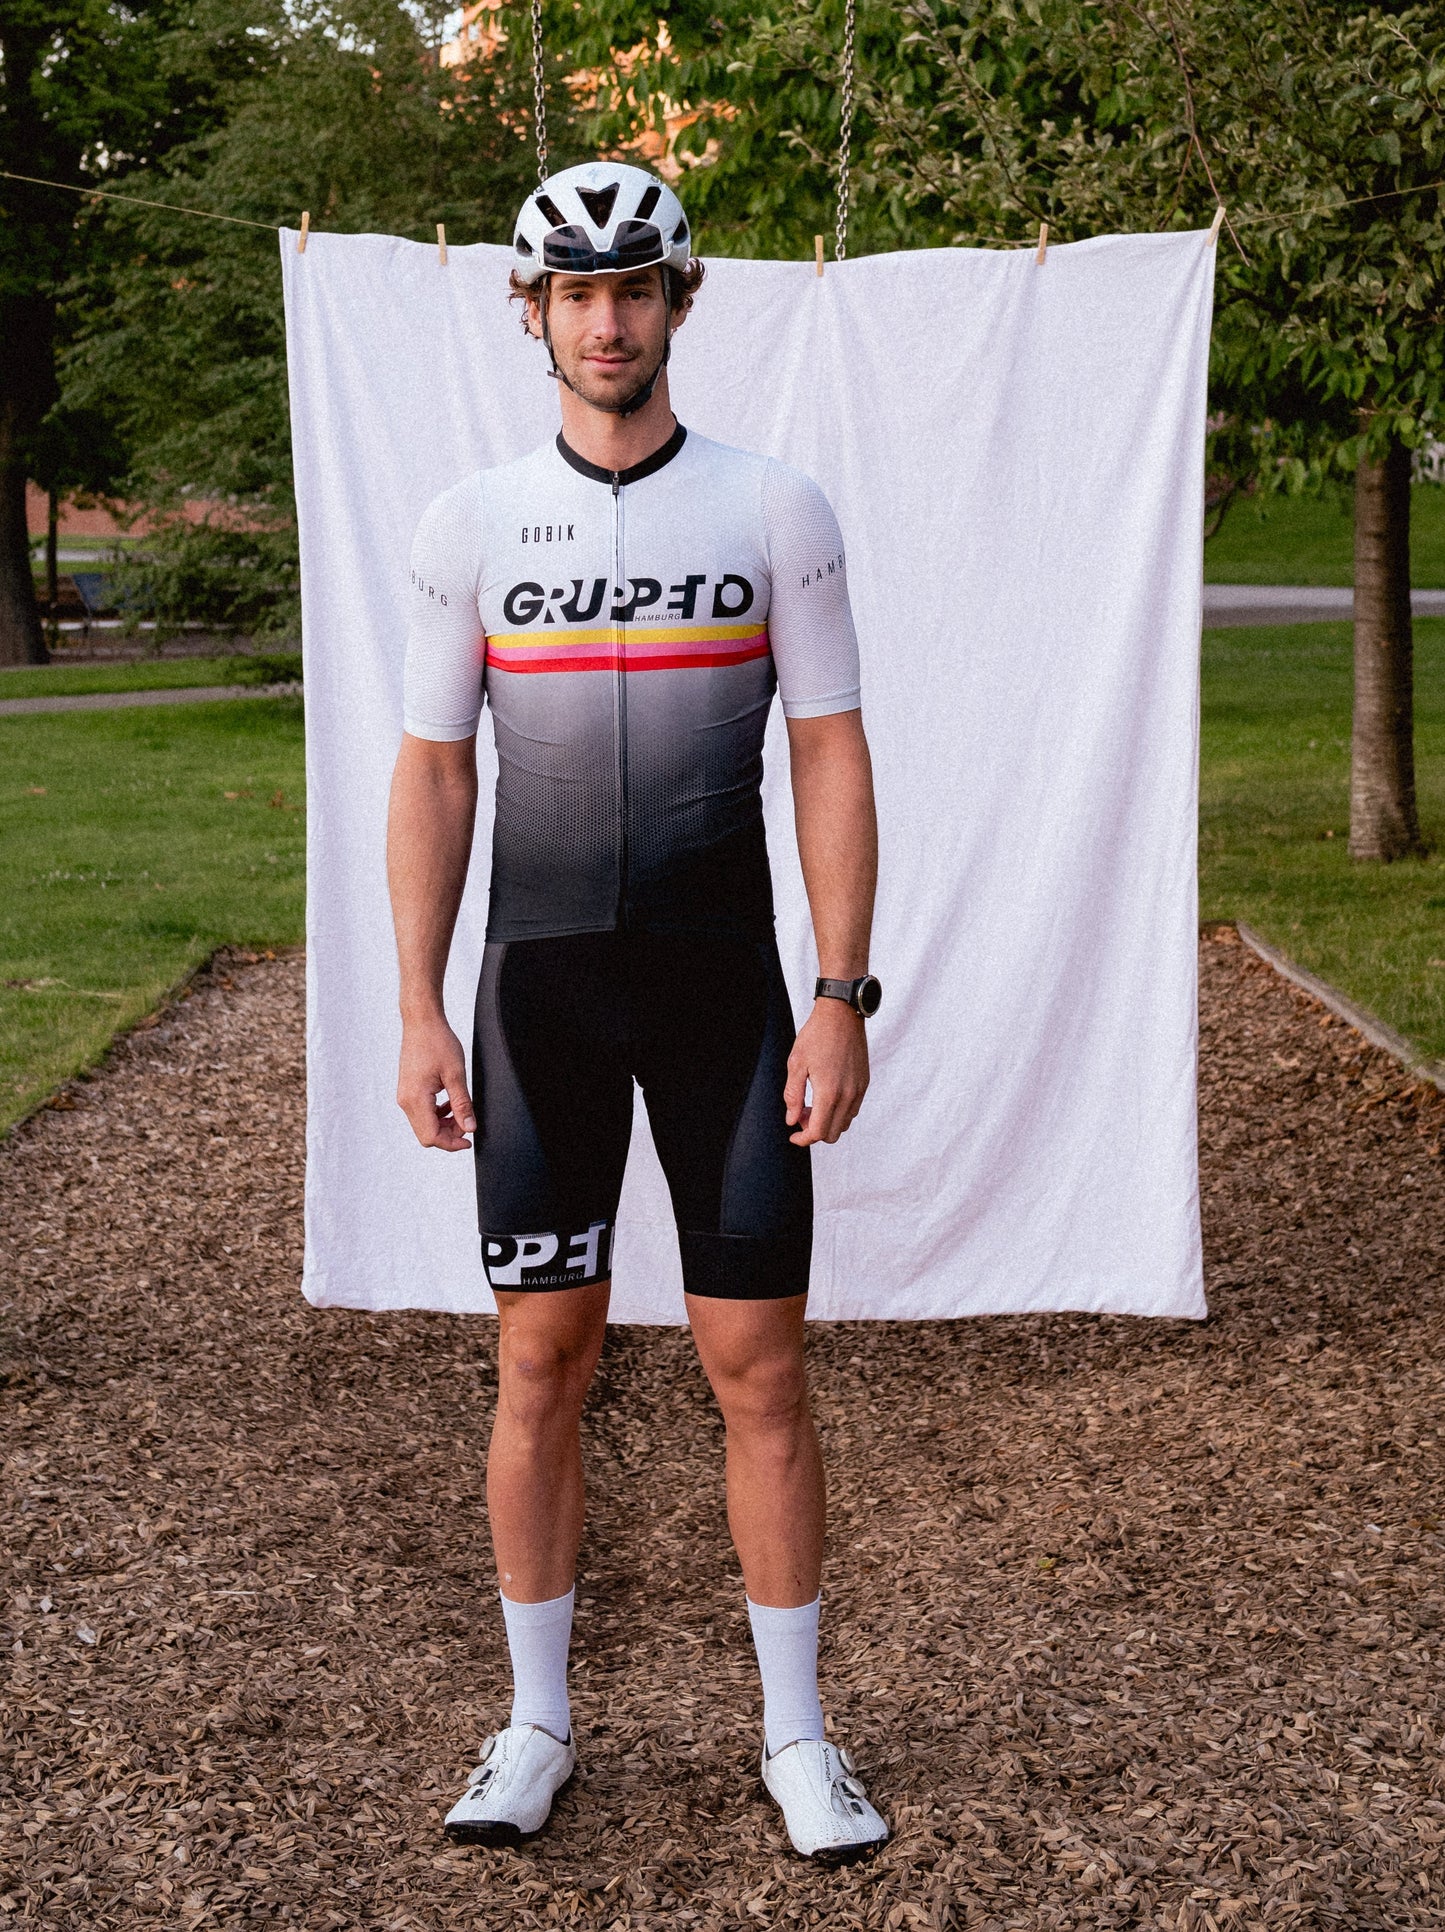 GRUPPETTO BLACK BIB SHORTS - perfect partner for long rides